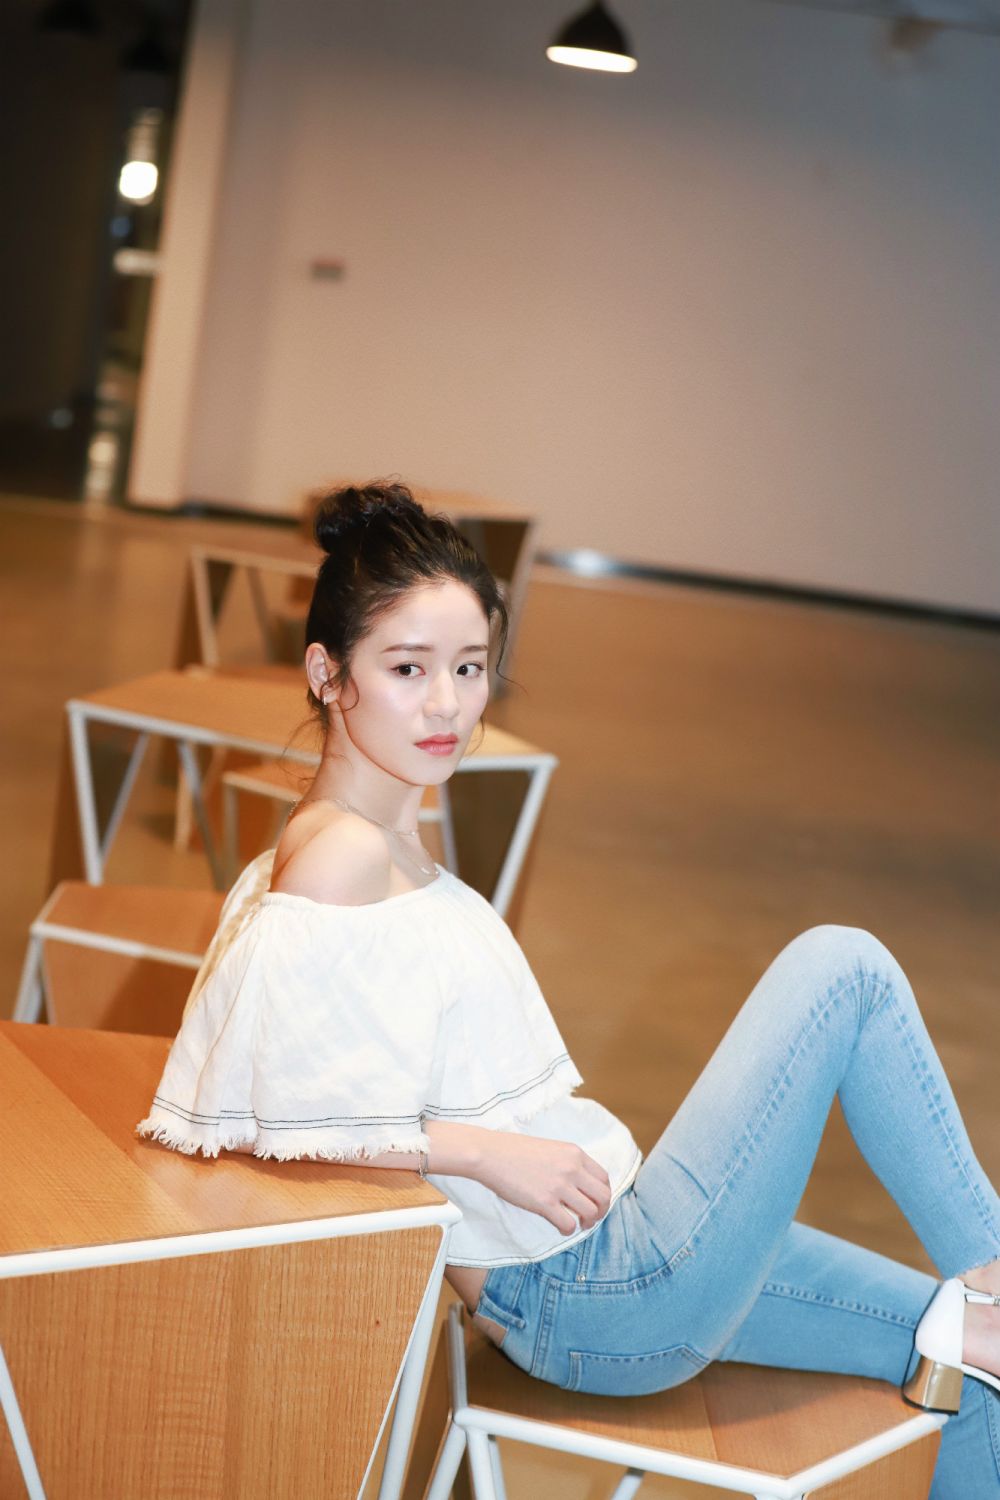 Sonia Yuan Sexy and Hottest Photos , Latest Pics